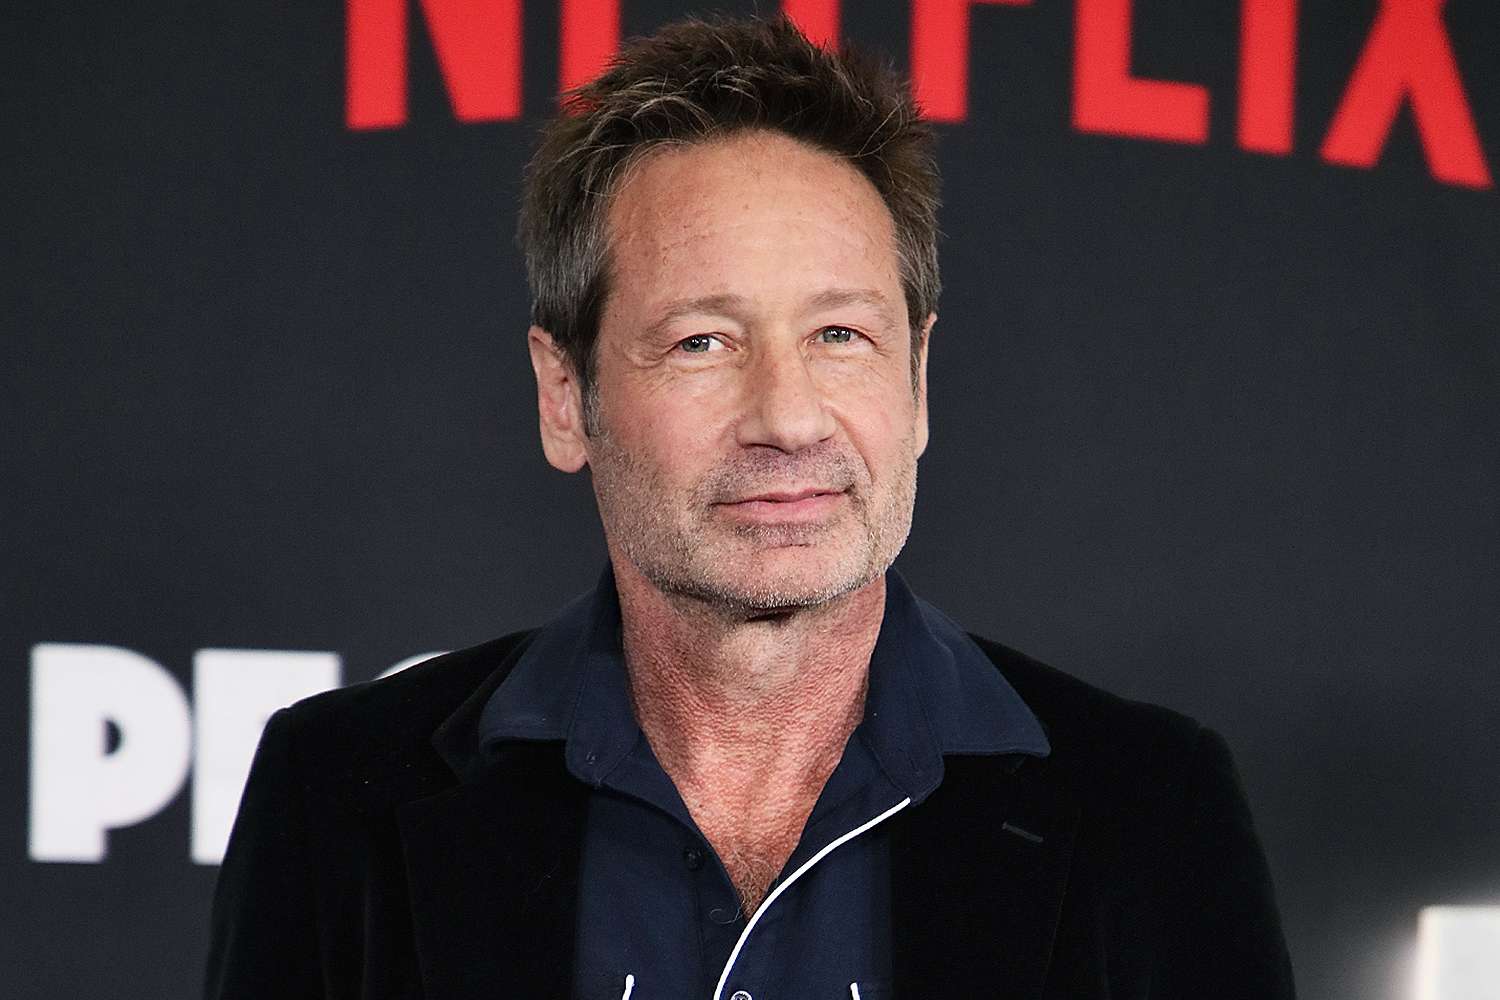 David Duchovny Had Trouble 'Reattaching' to Daughter After 'Nightmare' RSV Experience: 'We Could Lose Her'